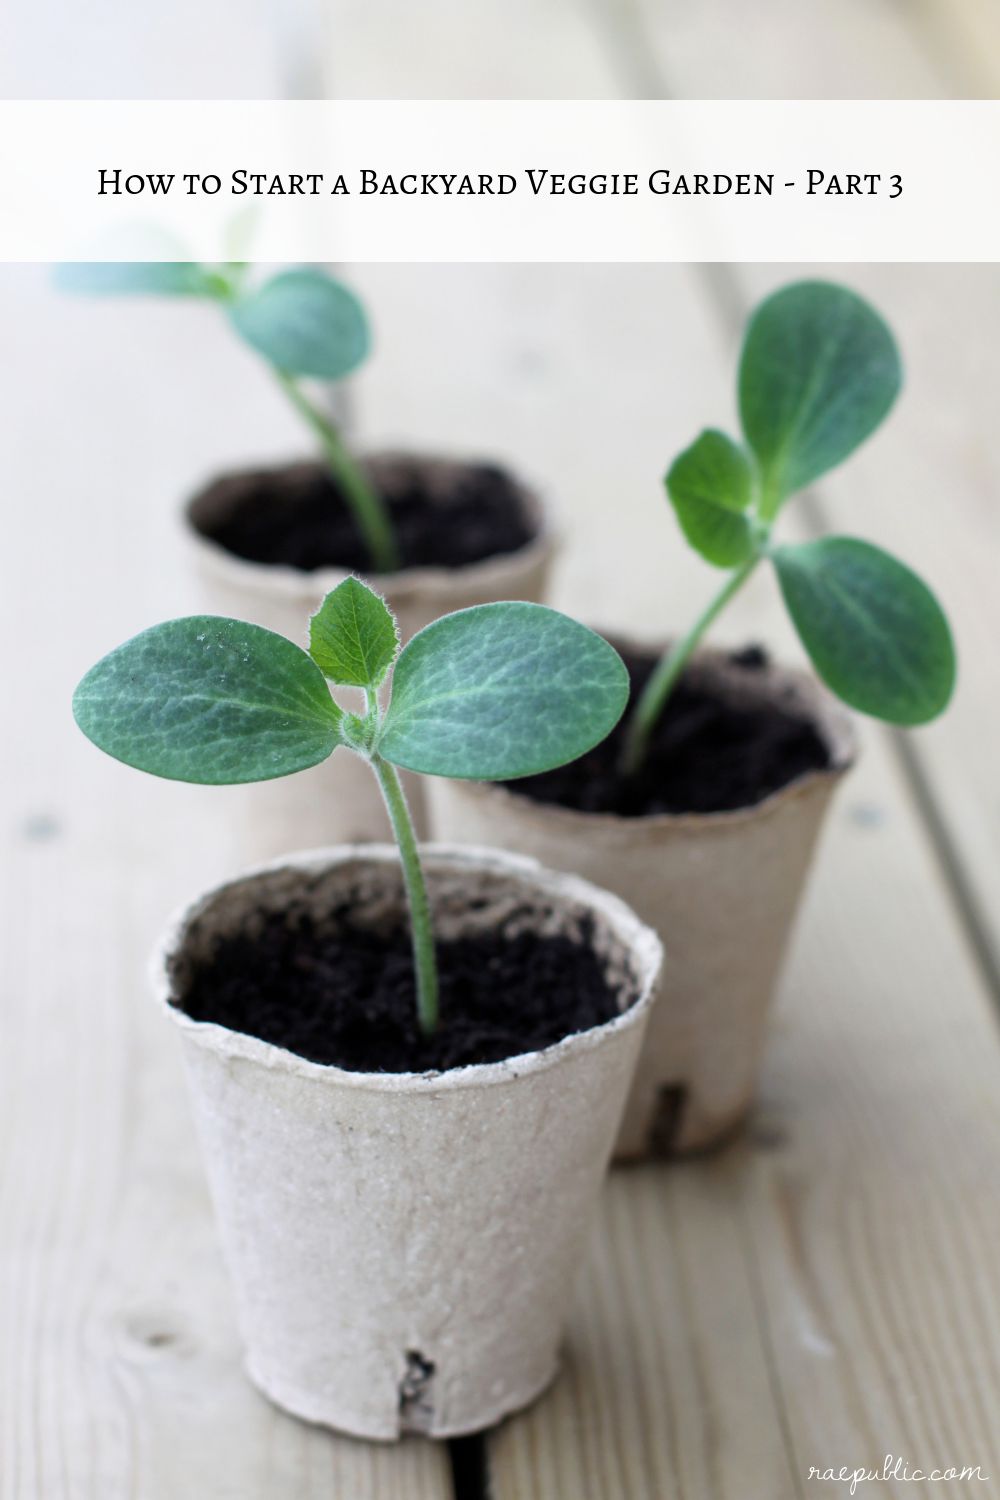 Starting your veggies indoors is sometimes the best option depending on the climate you live in and what you are hoping to grow. Read on to learn all about starting your vegetable seeds indoors.